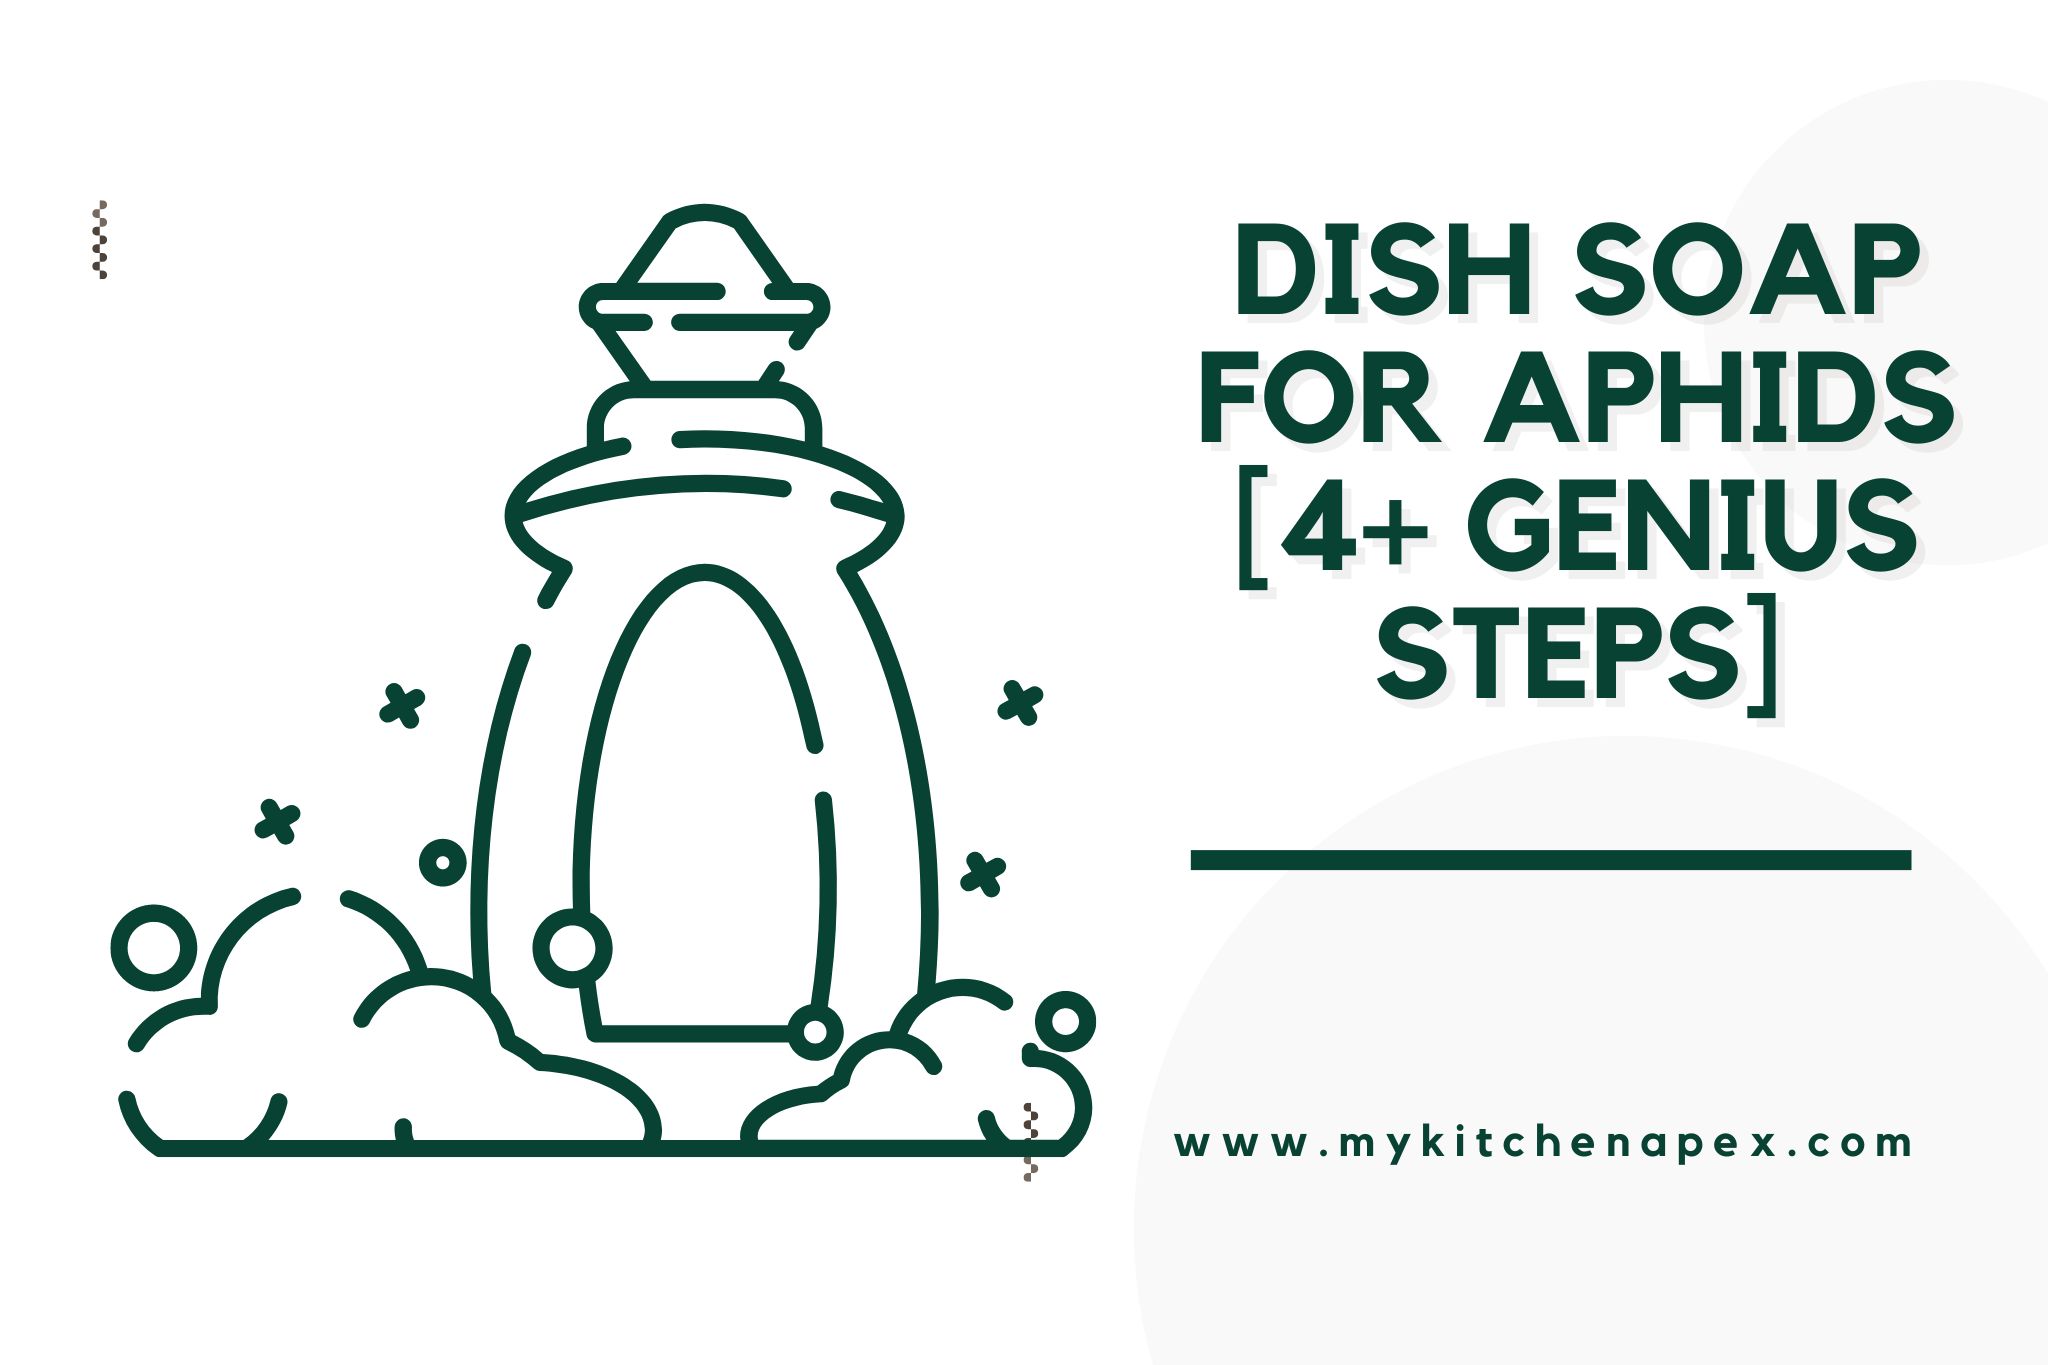 Dish Soap For Aphids [4+ GENIUS Steps]